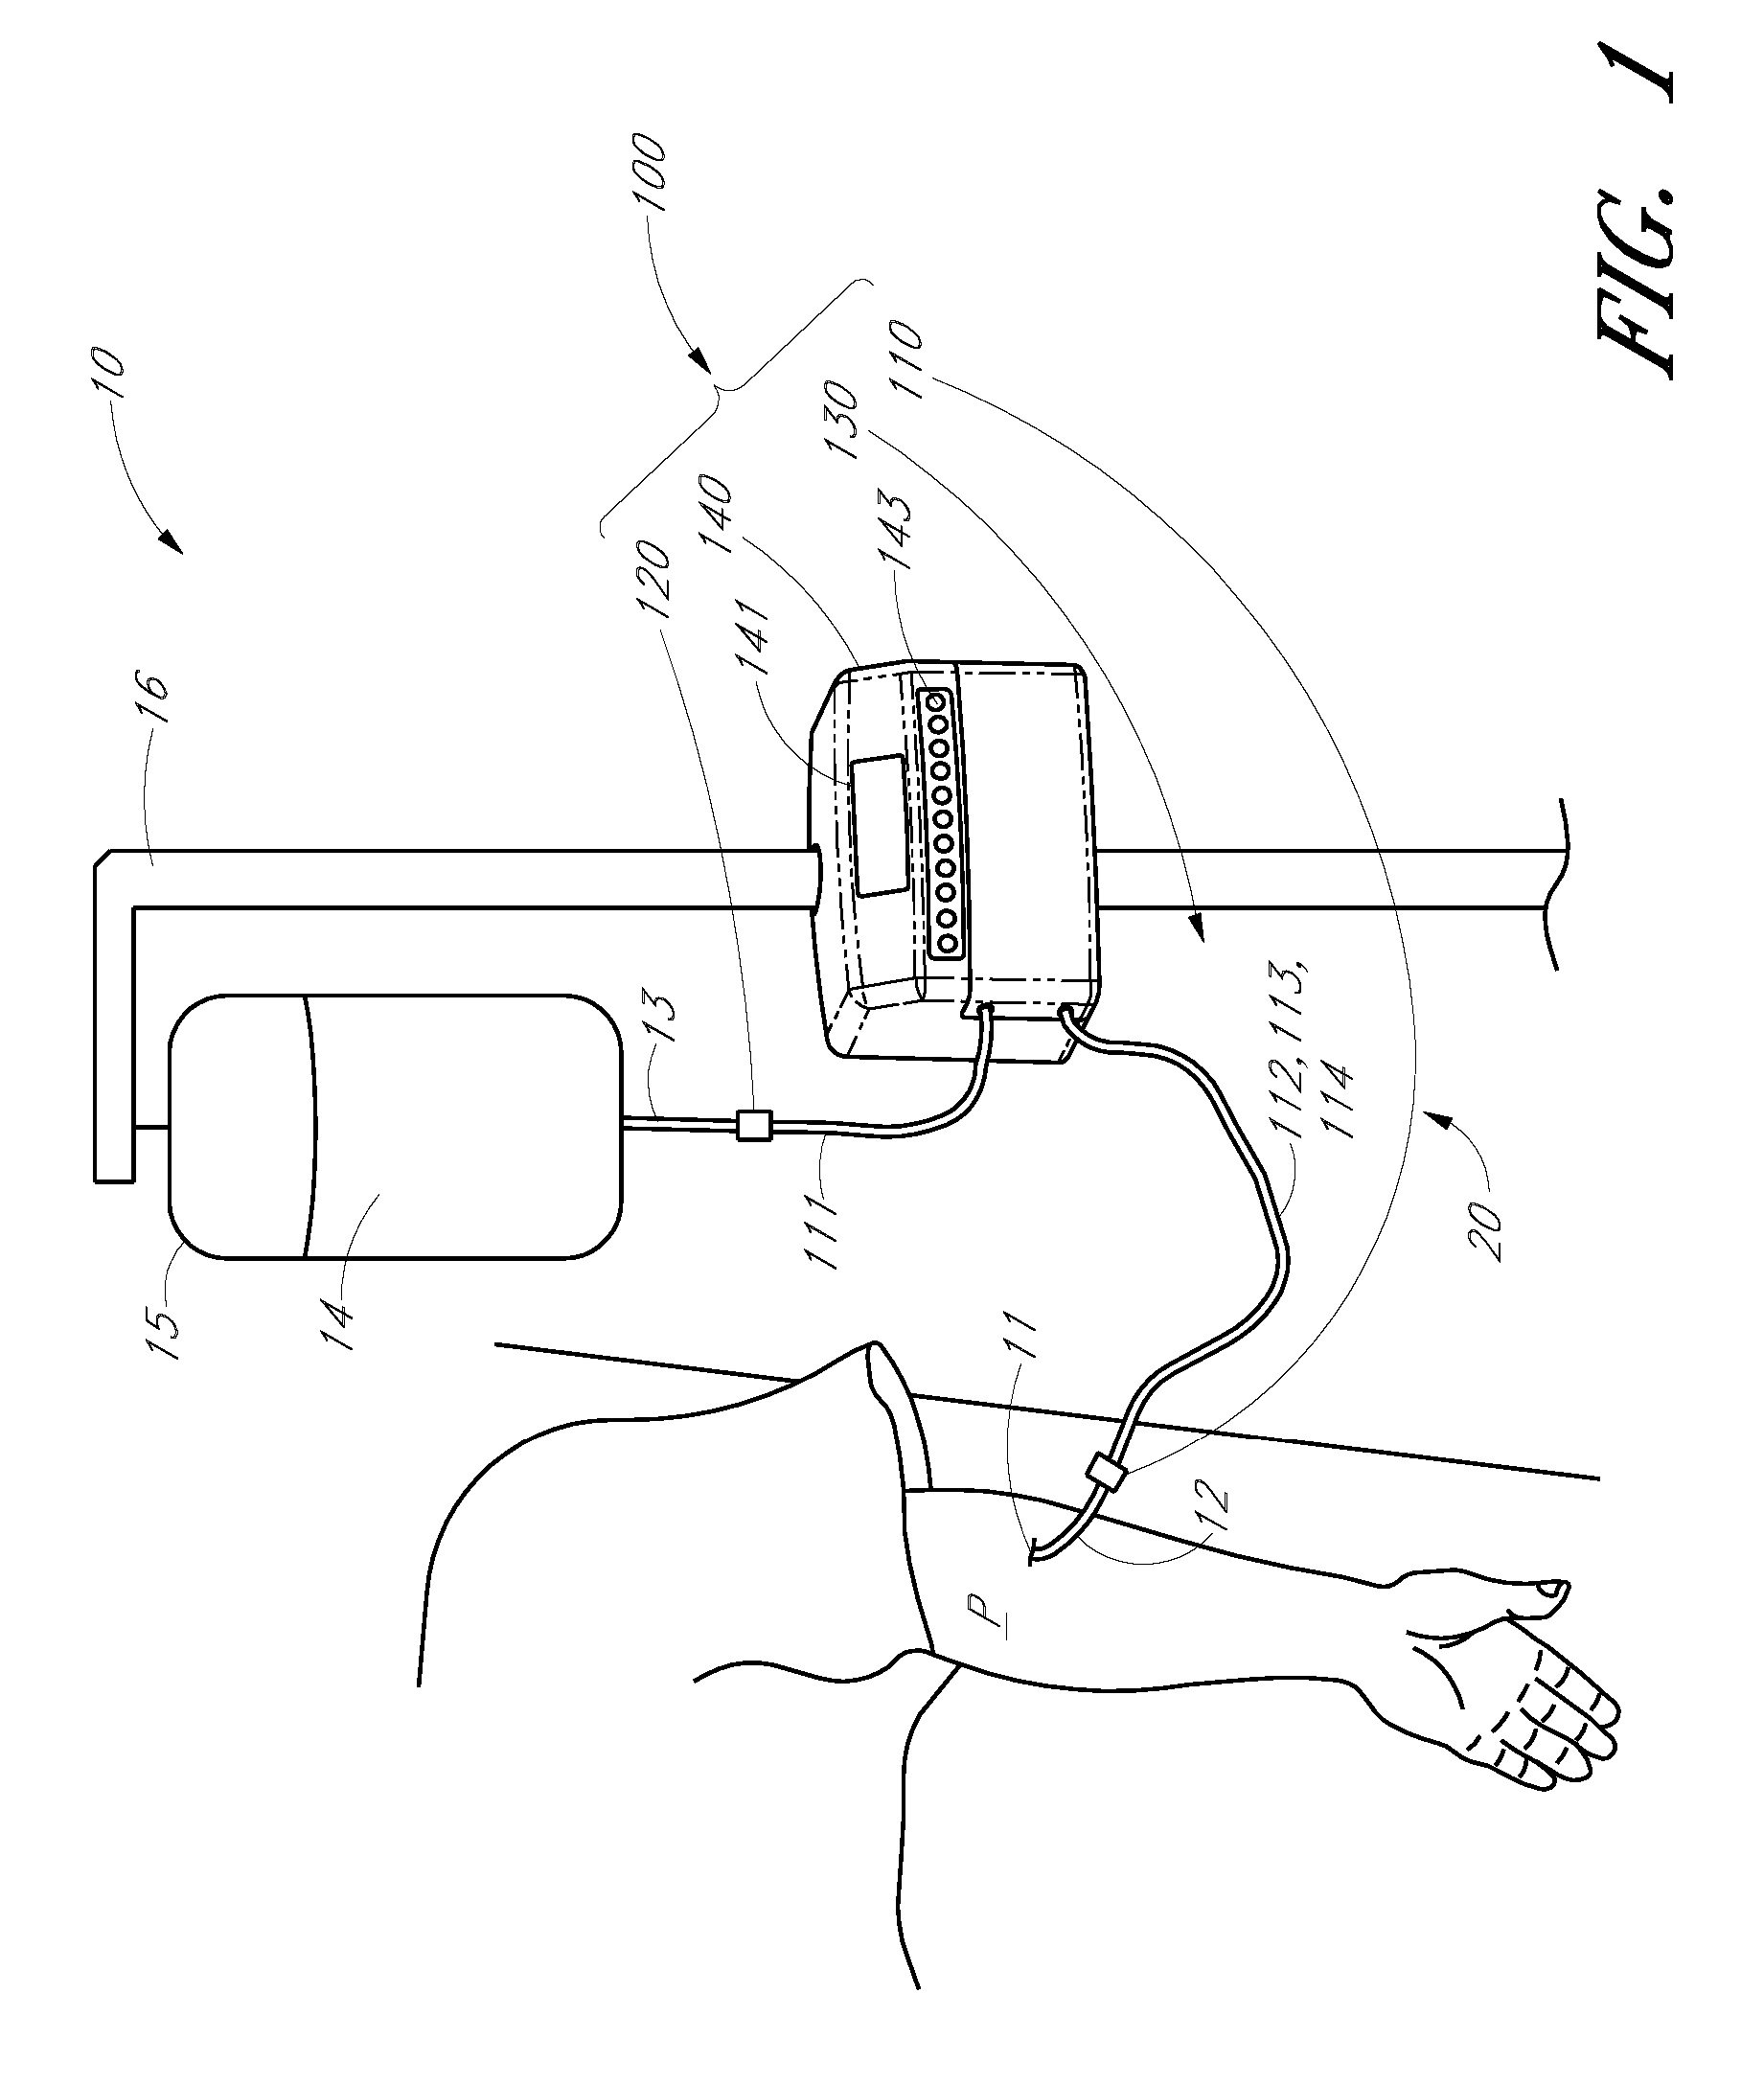 Apparatus and methods for analyzing body fluid samples